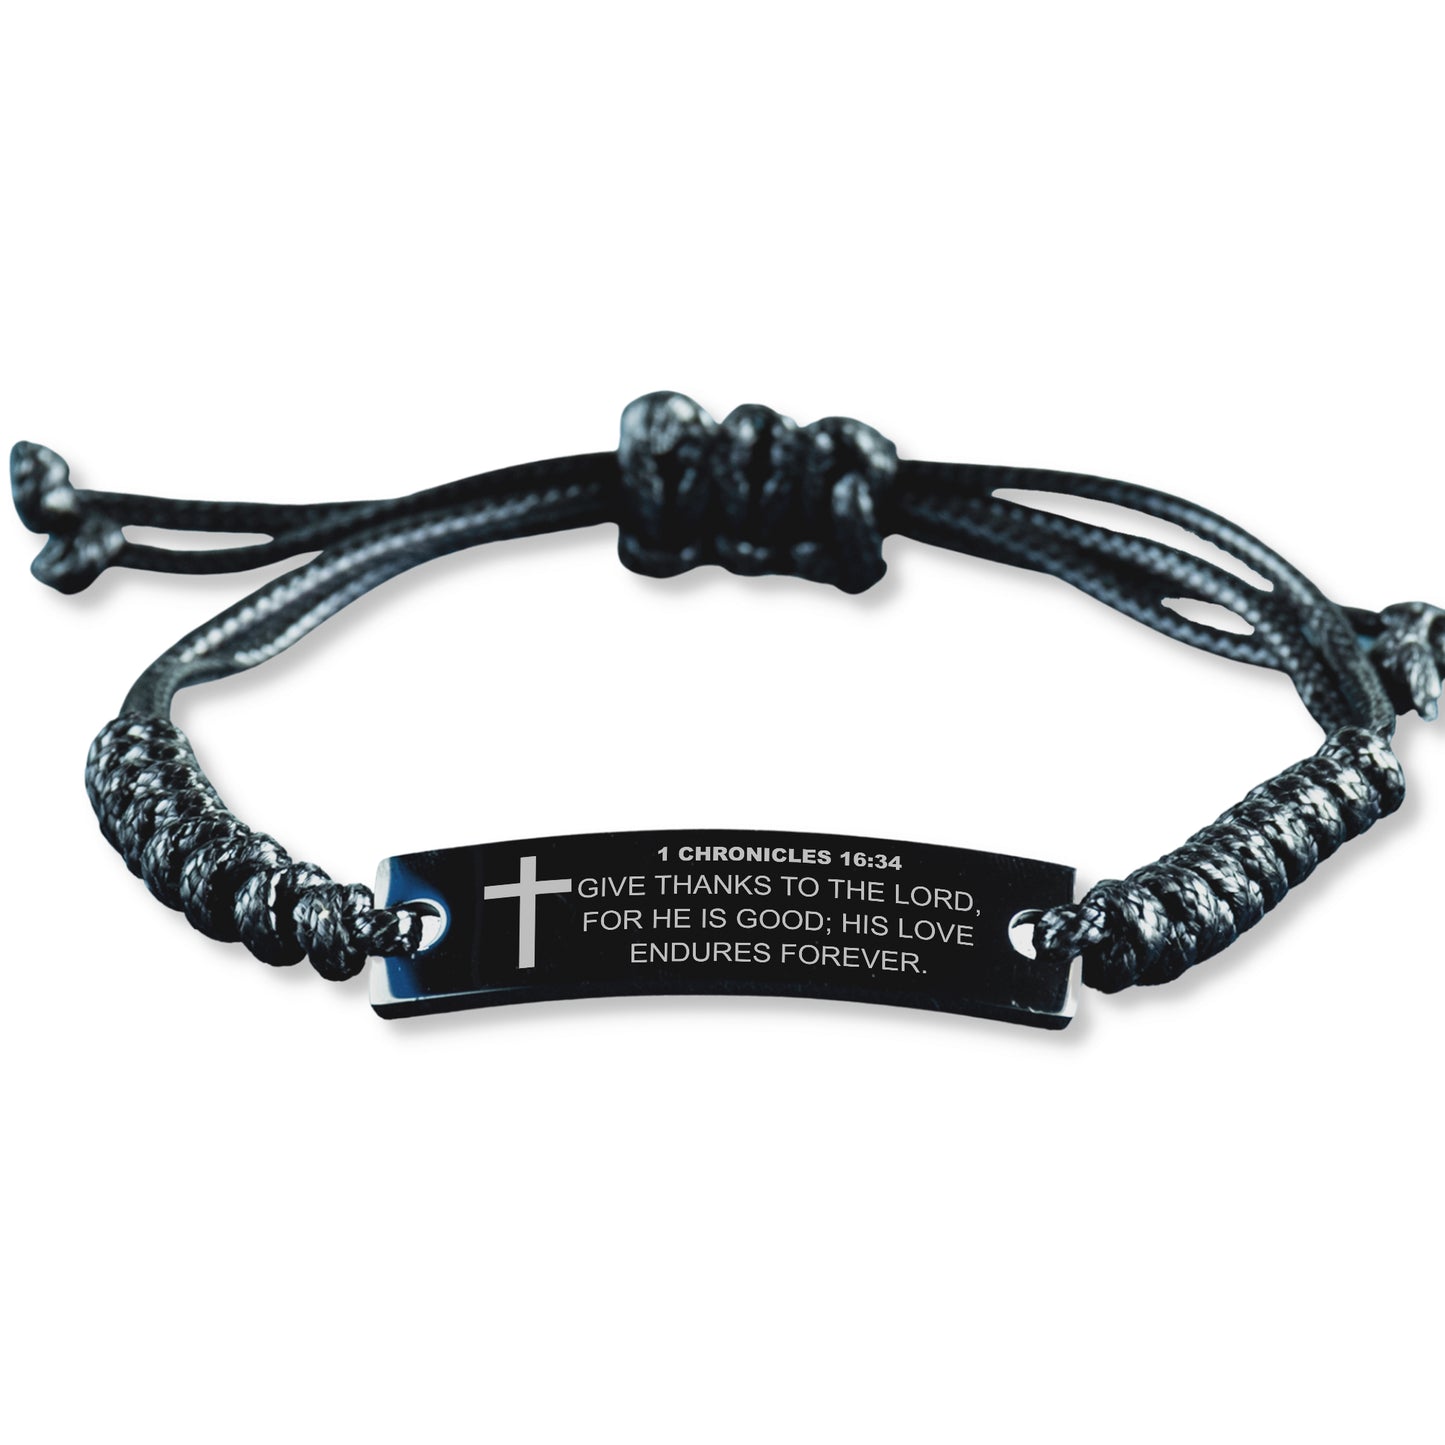 1 Chronicles 16 34 Bracelet, Give Thanks to the Lord, Bible Verse Bracelet, Black Braided Rope Bracelet, Gift for Christian.